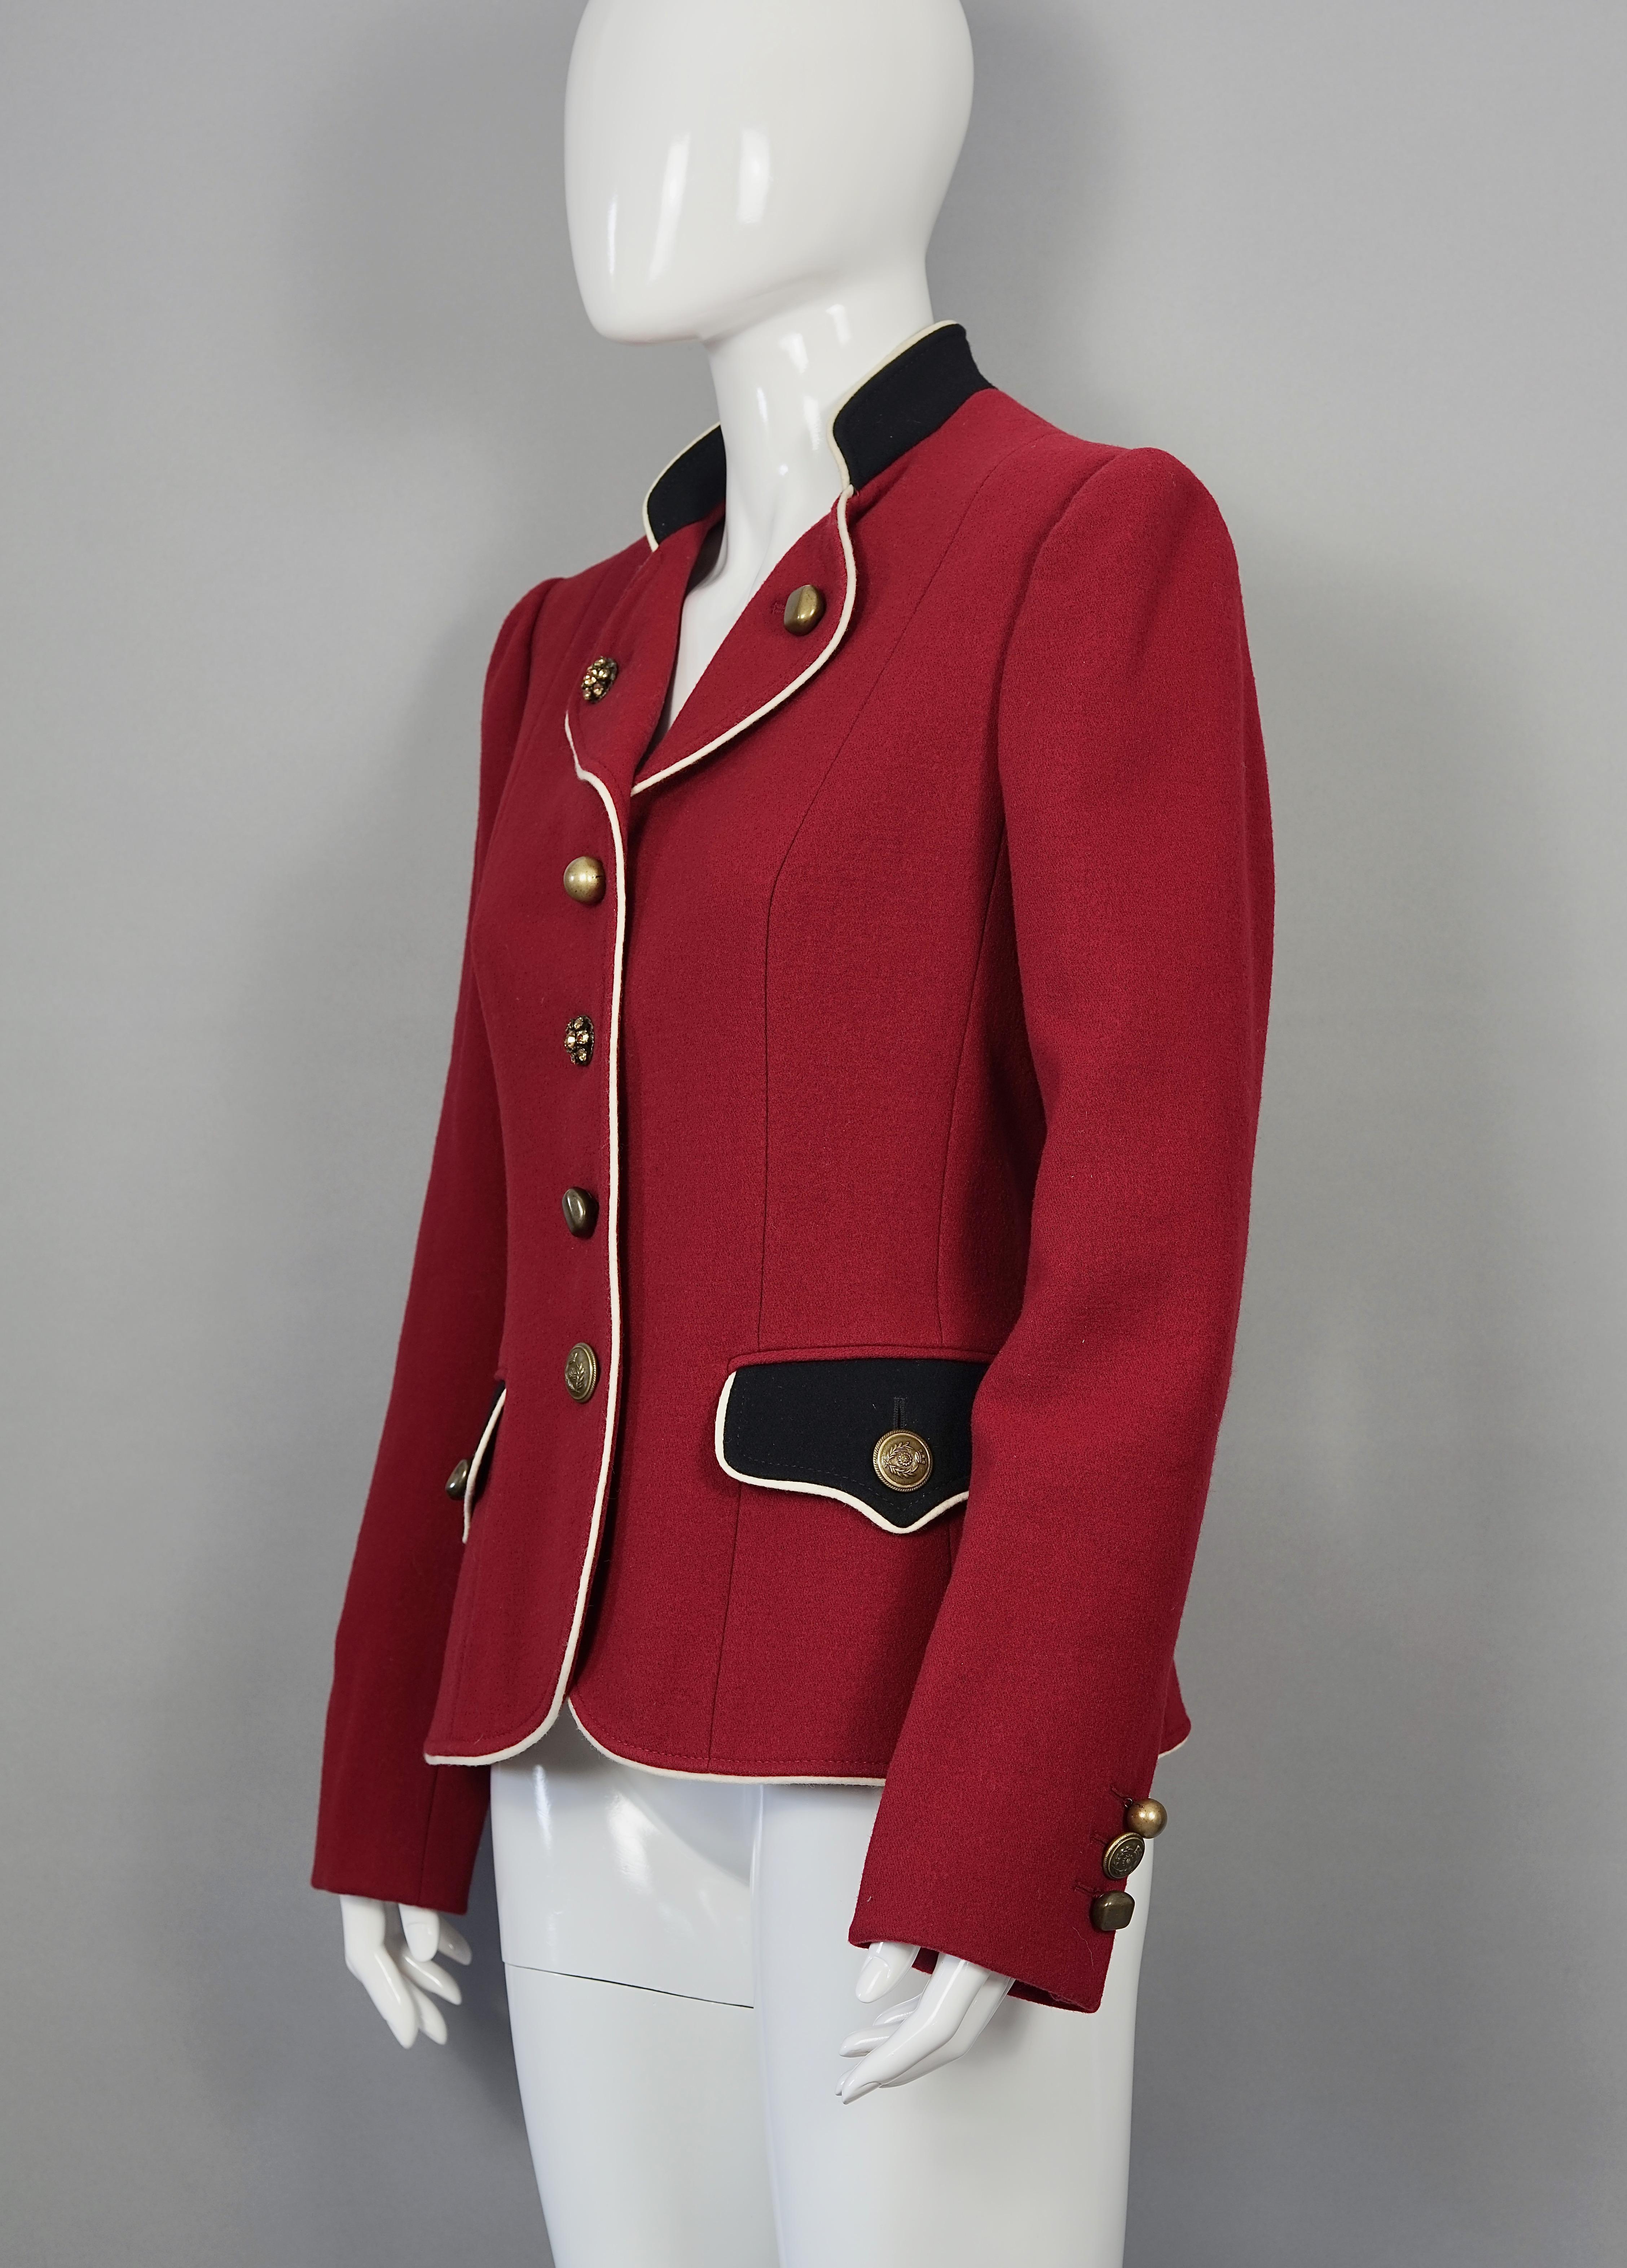 Vintage MOSCHINO CHEAP and CHIC Jeweled Buttons Cavalier Military Jacket

Measurements taken laid flat, please double bust and waist:
Shoulder: 16.33 inches (41.5 cm)
Sleeves: 24.80 inches (63 cm)
Bust: 20 inches (51 cm)
Waist: 17.32 inches (44